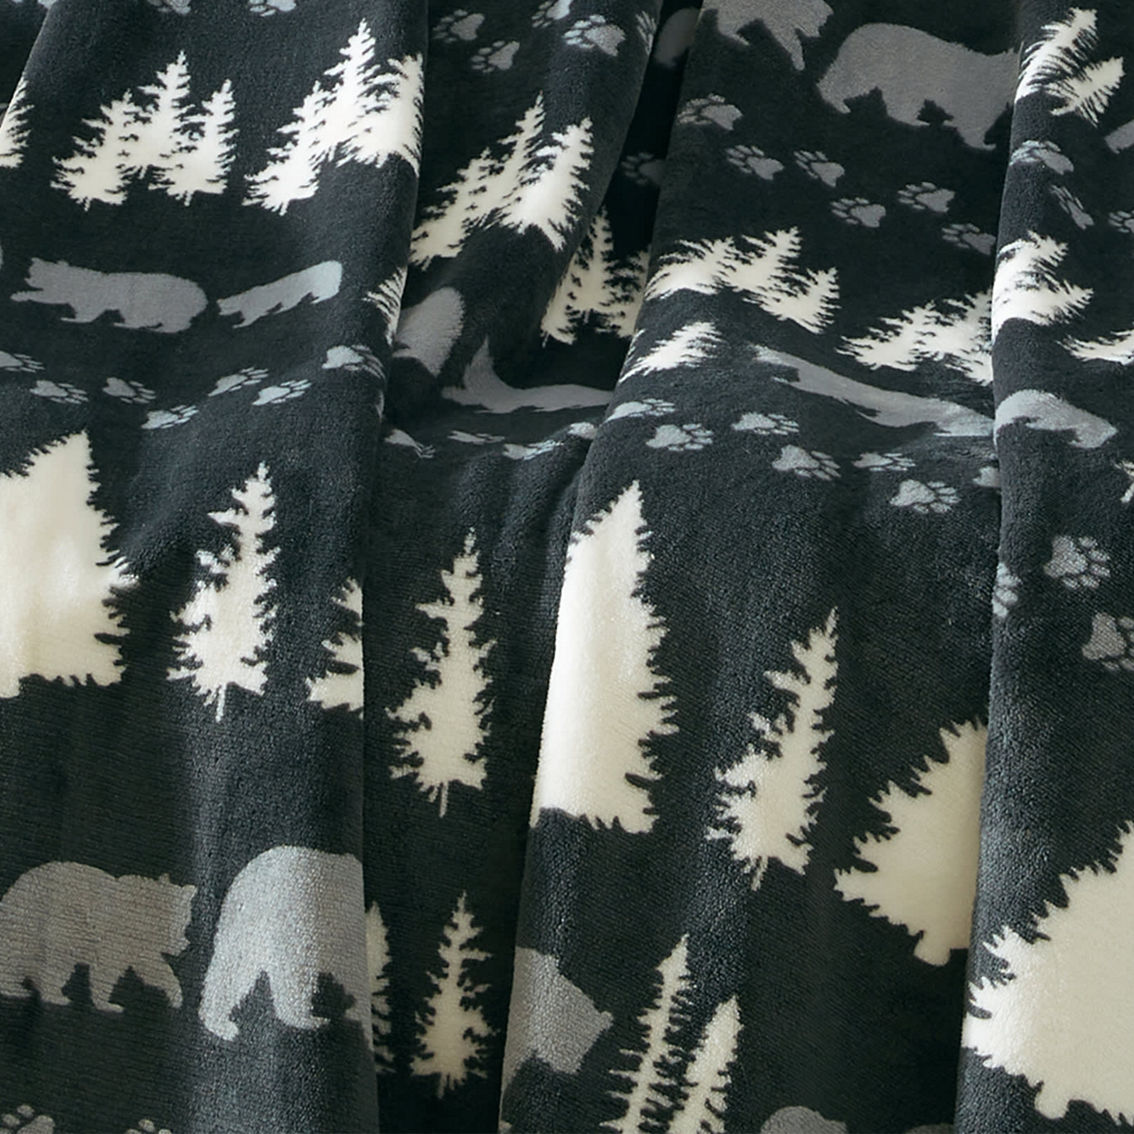 Colemand Reversible Printed Plush and Faux Fur Throw Blanket - 60 in. x 80 in. - Image 3 of 4